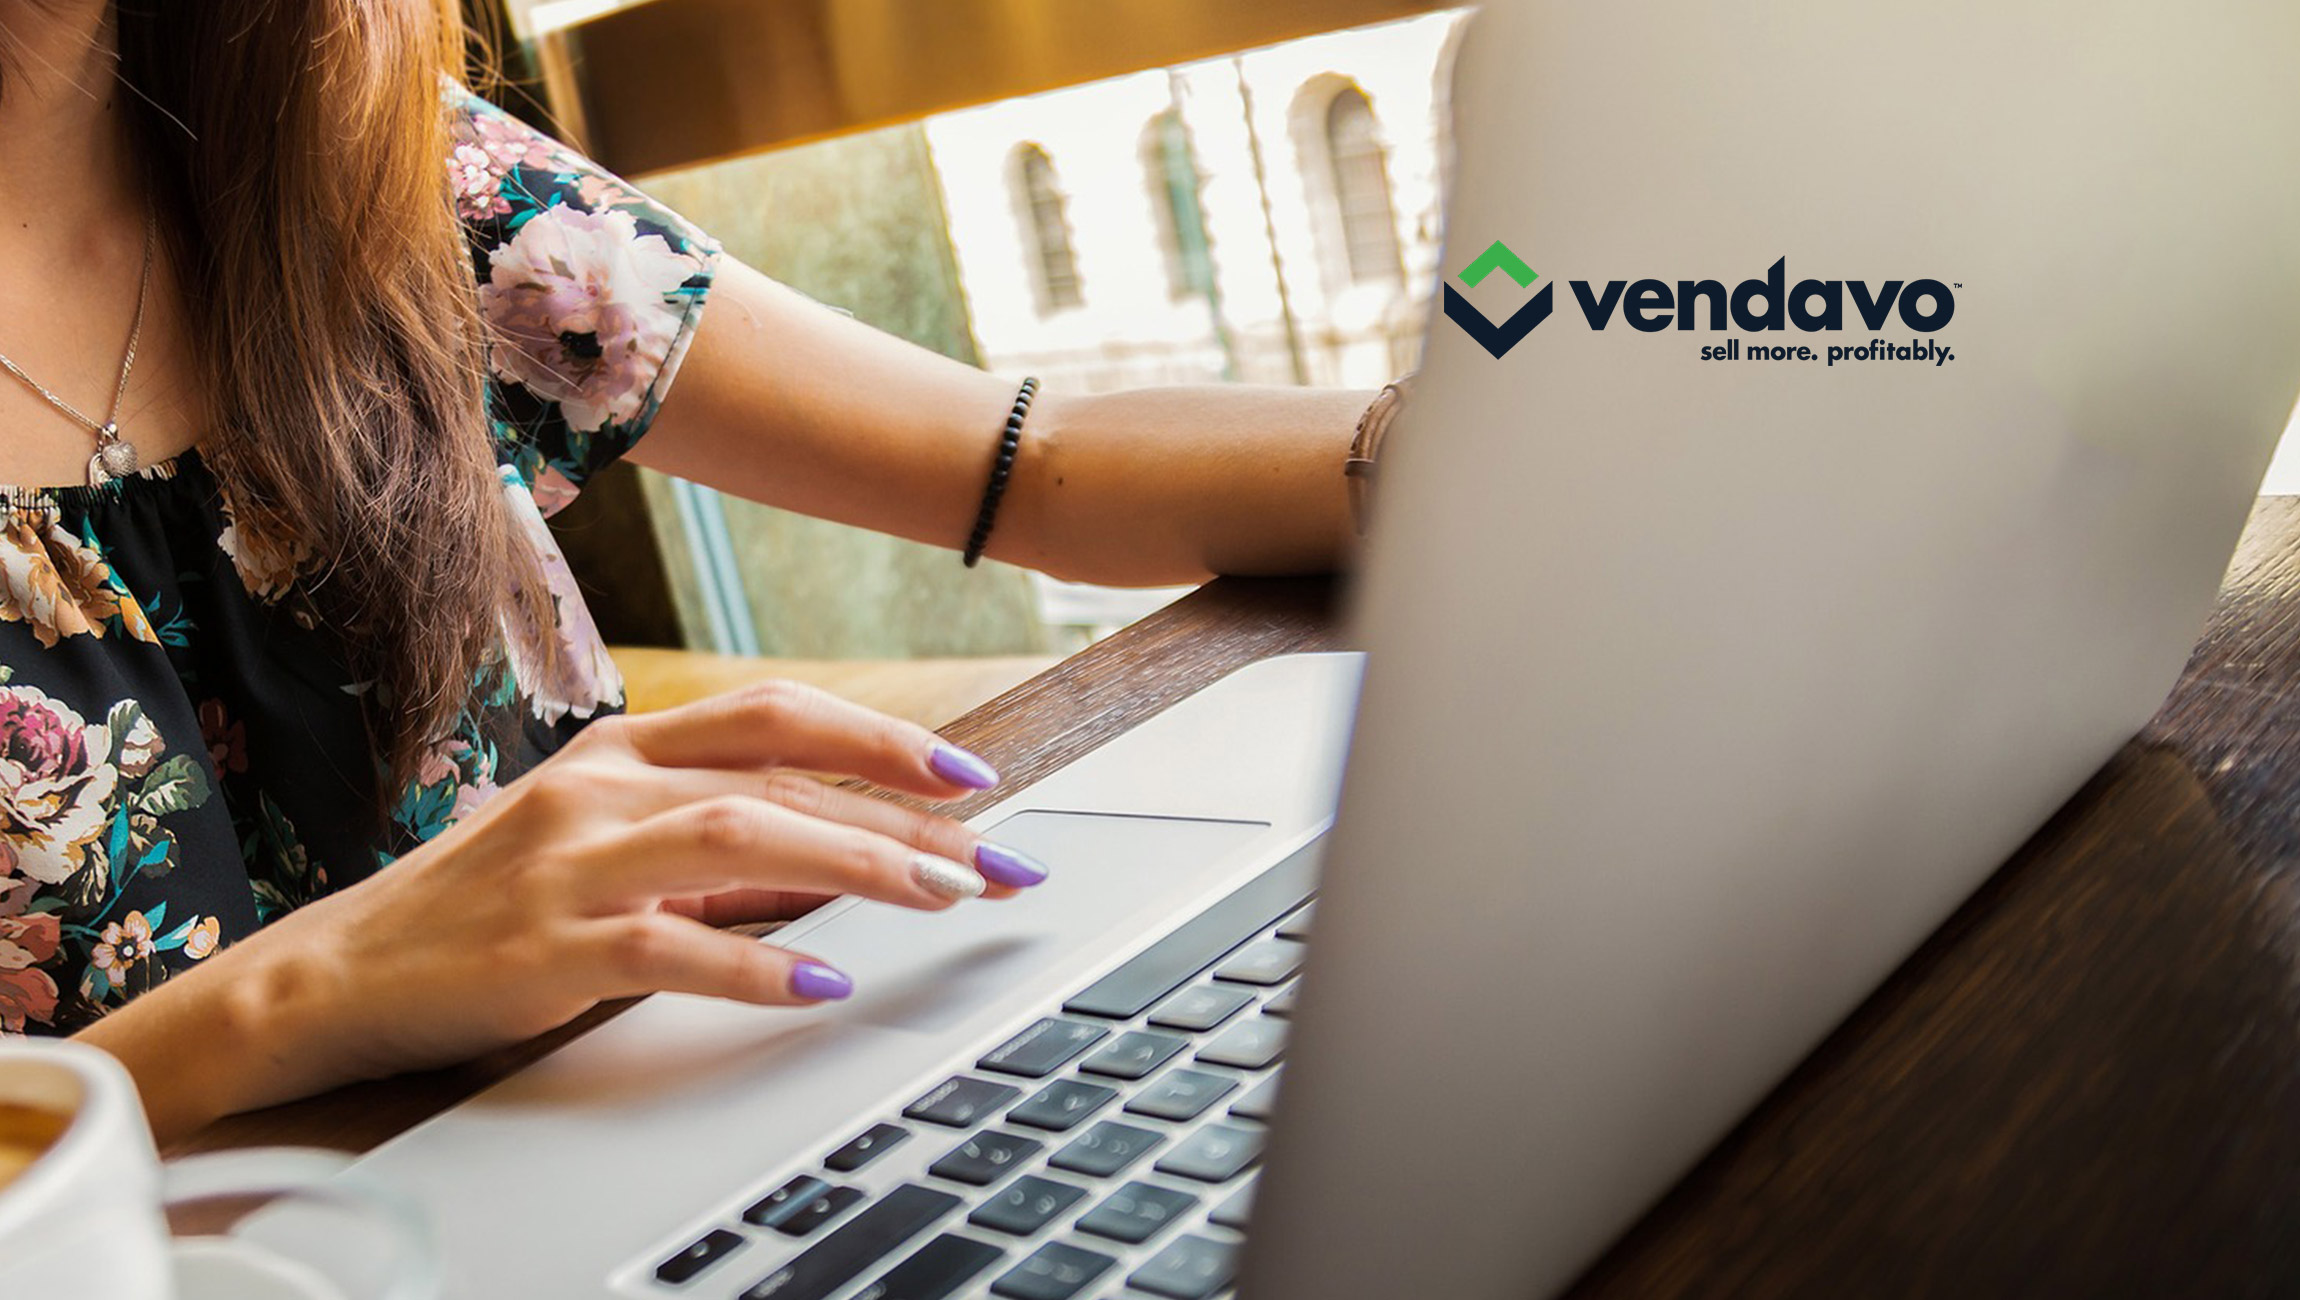 Vendavo Announces Upcoming Events Focused on Pricing, Sales, and Strategy